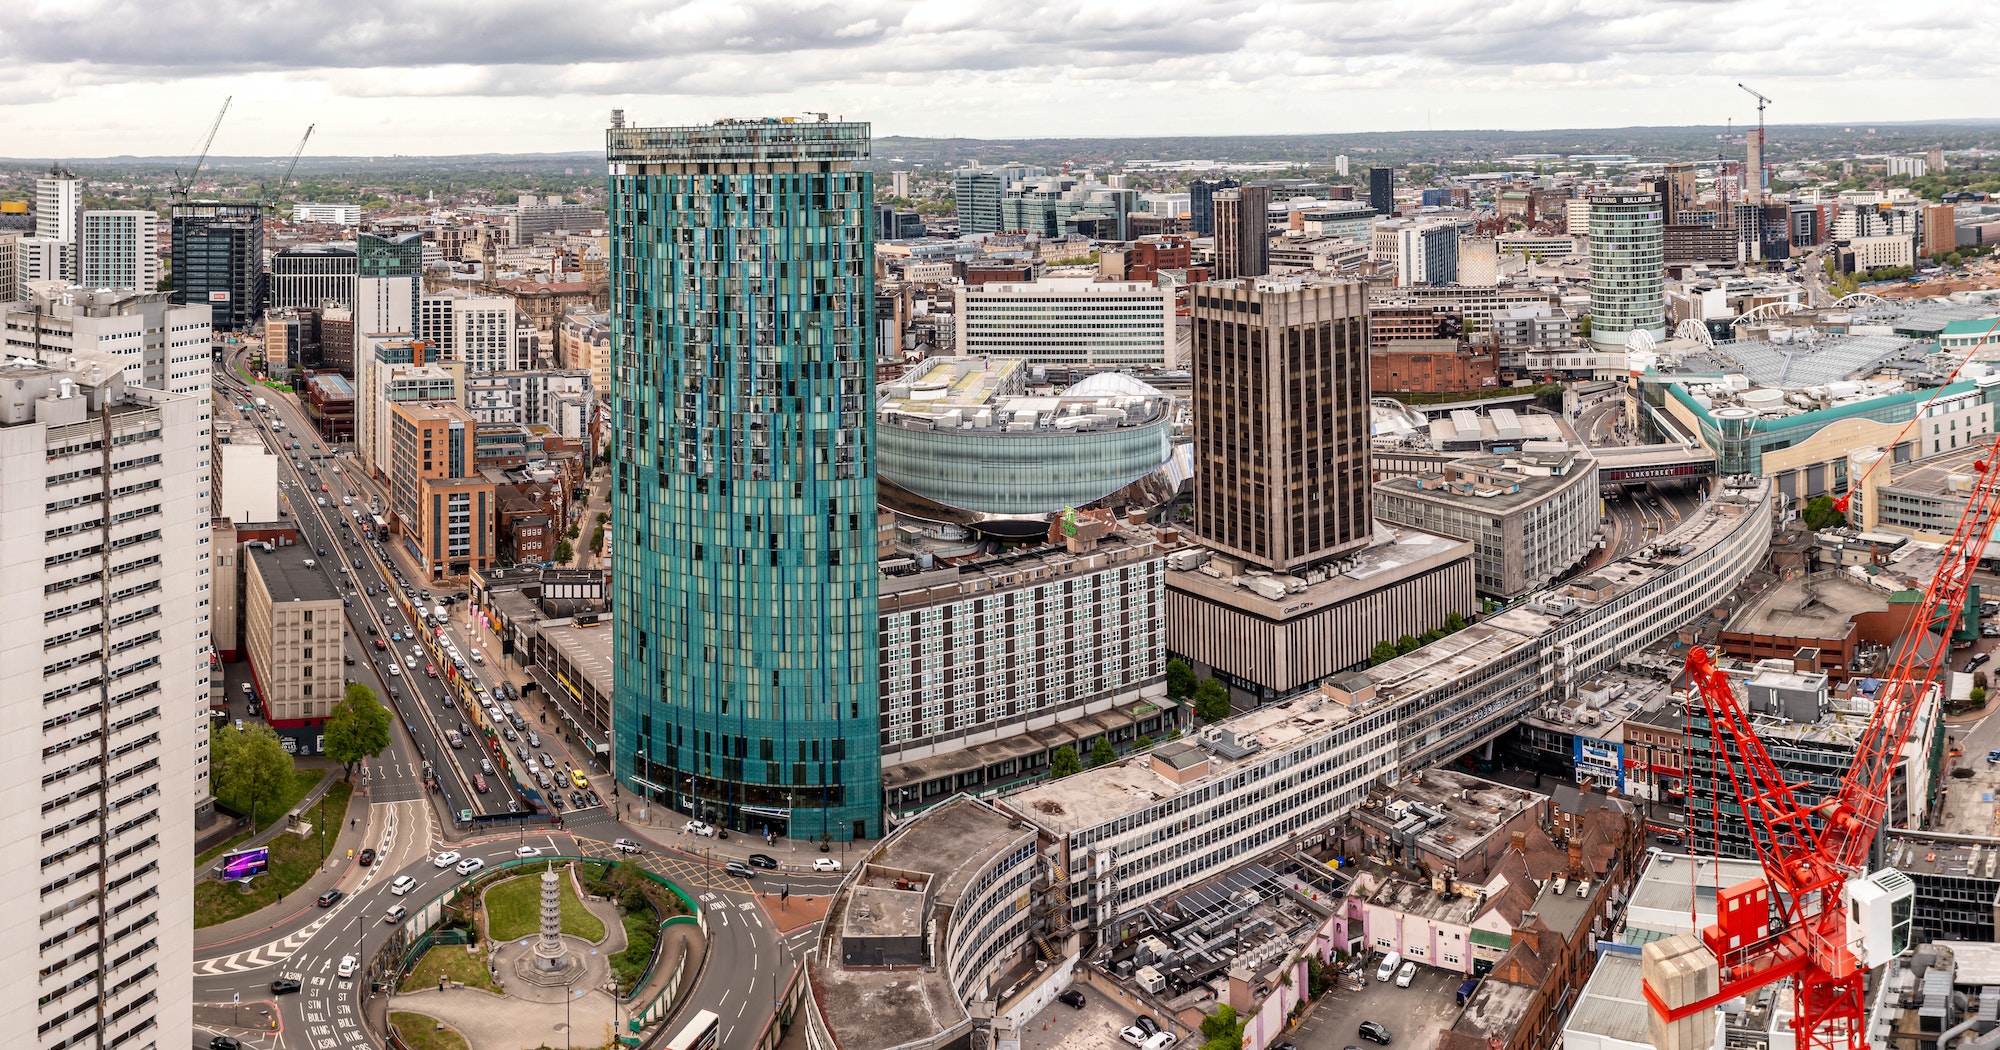 Aerial view of Birmingham cityscape with Radisson Blu hotel in foreground